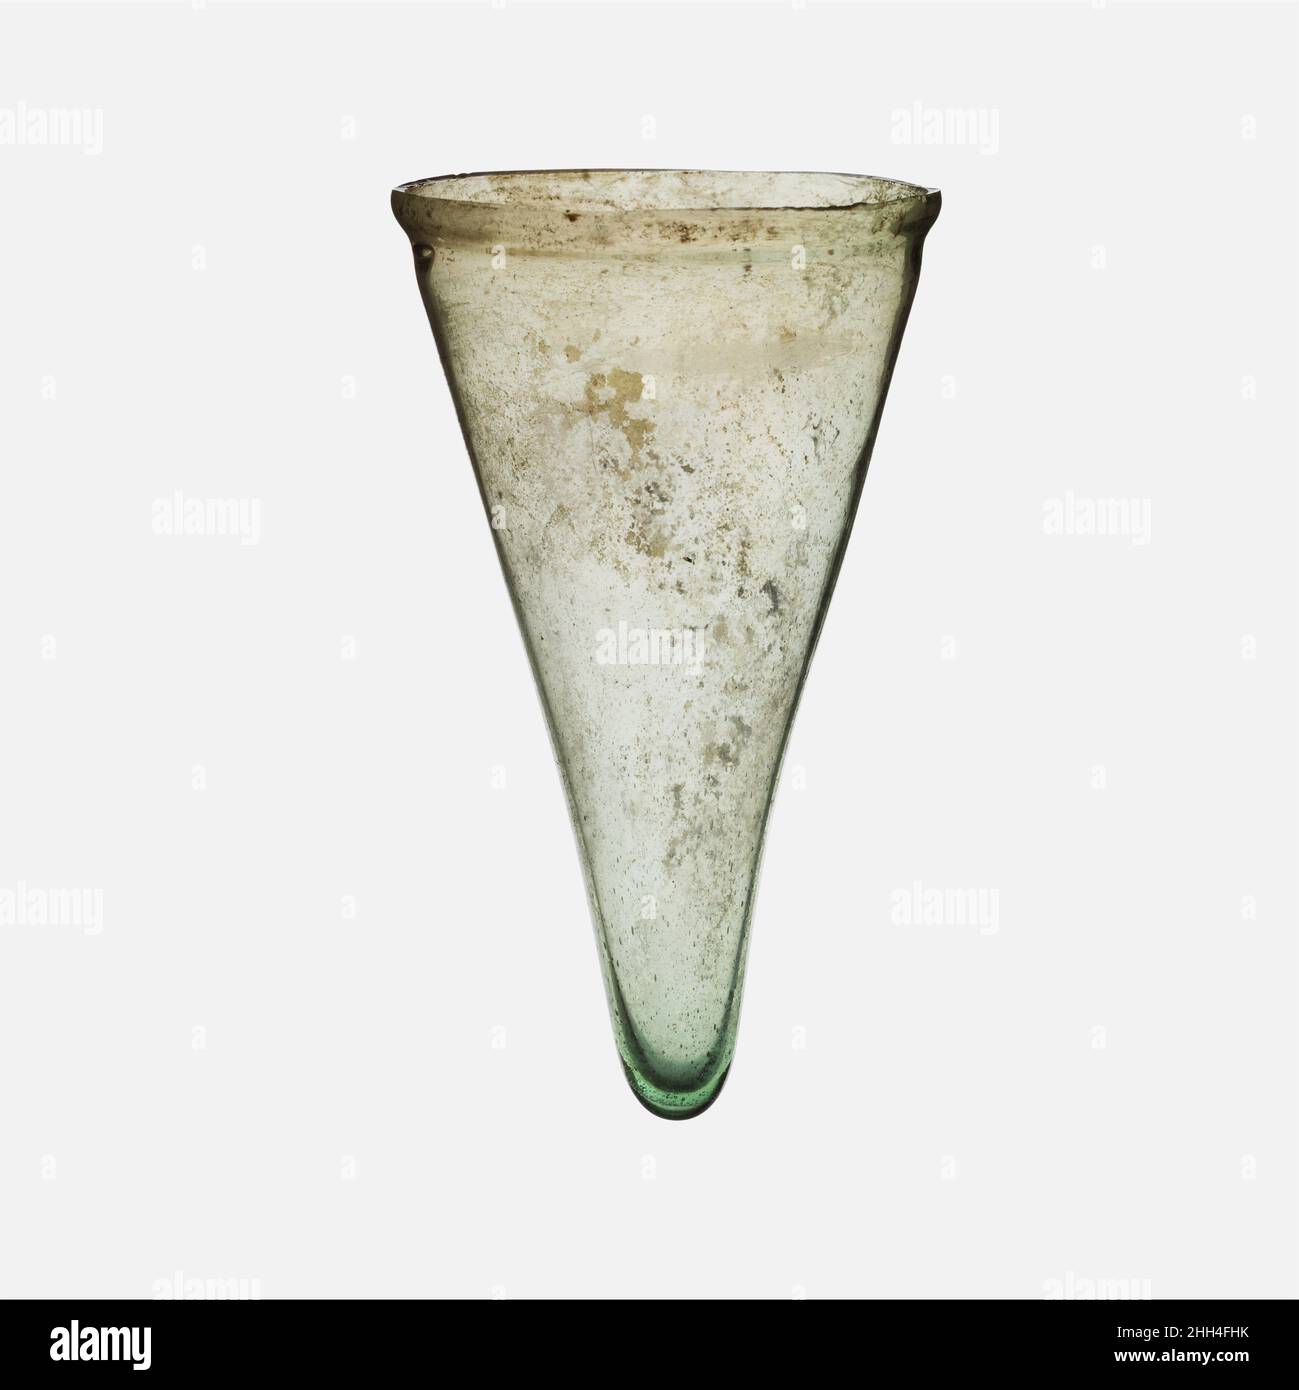 Glass lamp 4th century A.D. Roman Translucent pale green with bluish tingeUnworked, uneven, knocked off rim; narrow bulging collar below; almost straight sides tapering to pointed, thick bottom, with small flattened pad at tip.Intact; pinprick and some larger bubbles; some pitting, dulling, and iridescence on one side on exterior.. Glass lamp. Roman. 4th century A.D.. Glass; blown. Late Imperial. Glass Stock Photo